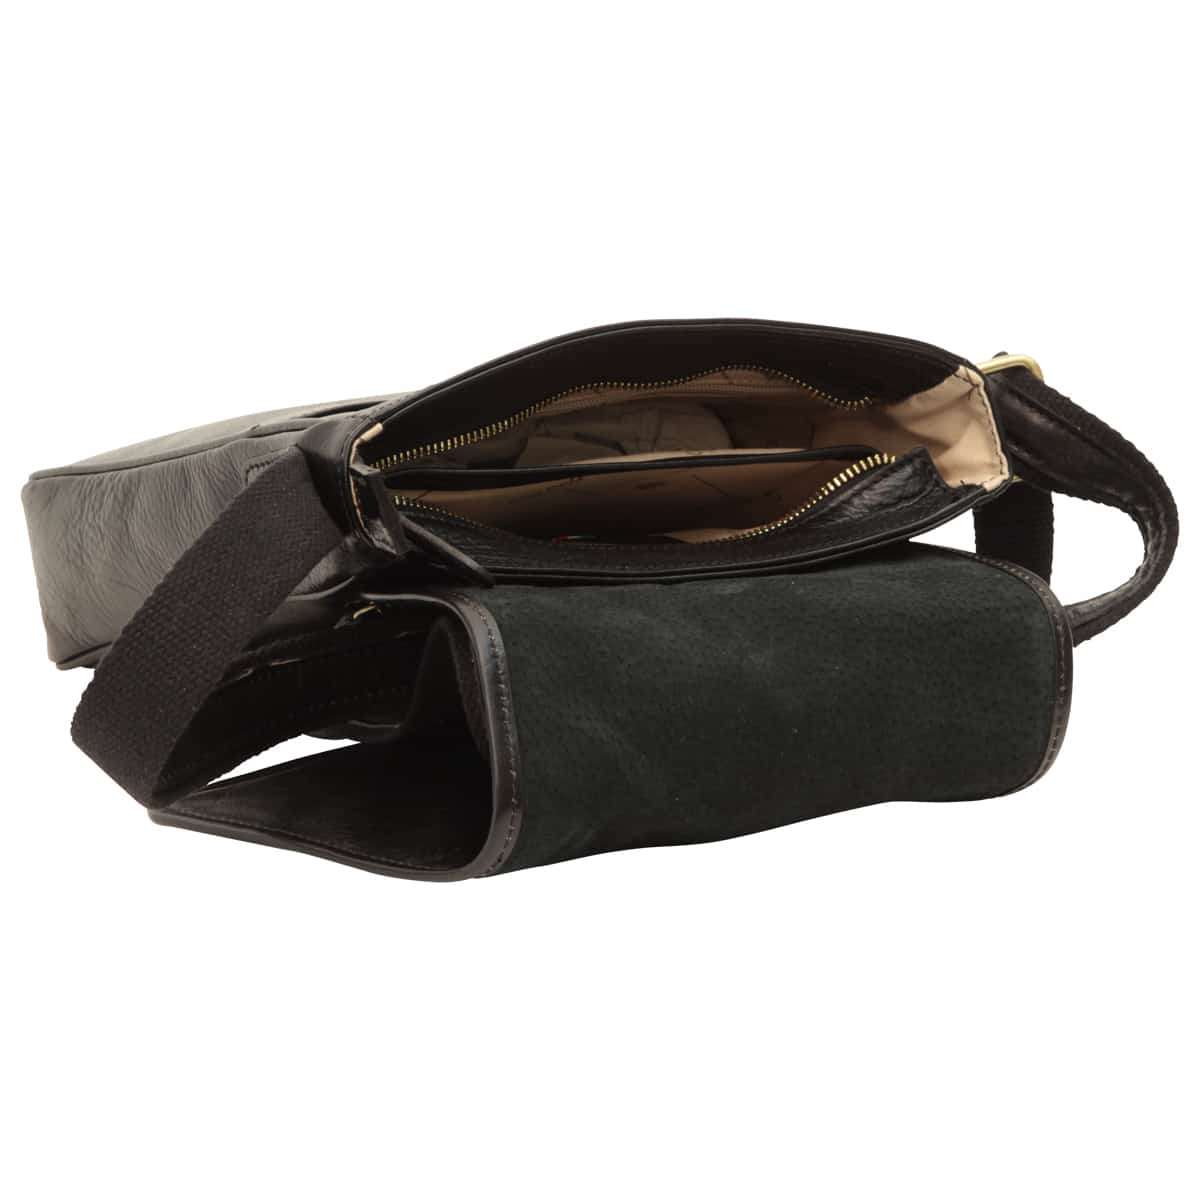 Small leather bag with magnetic closure - Black | 406689NE | EURO | Old Angler Firenze